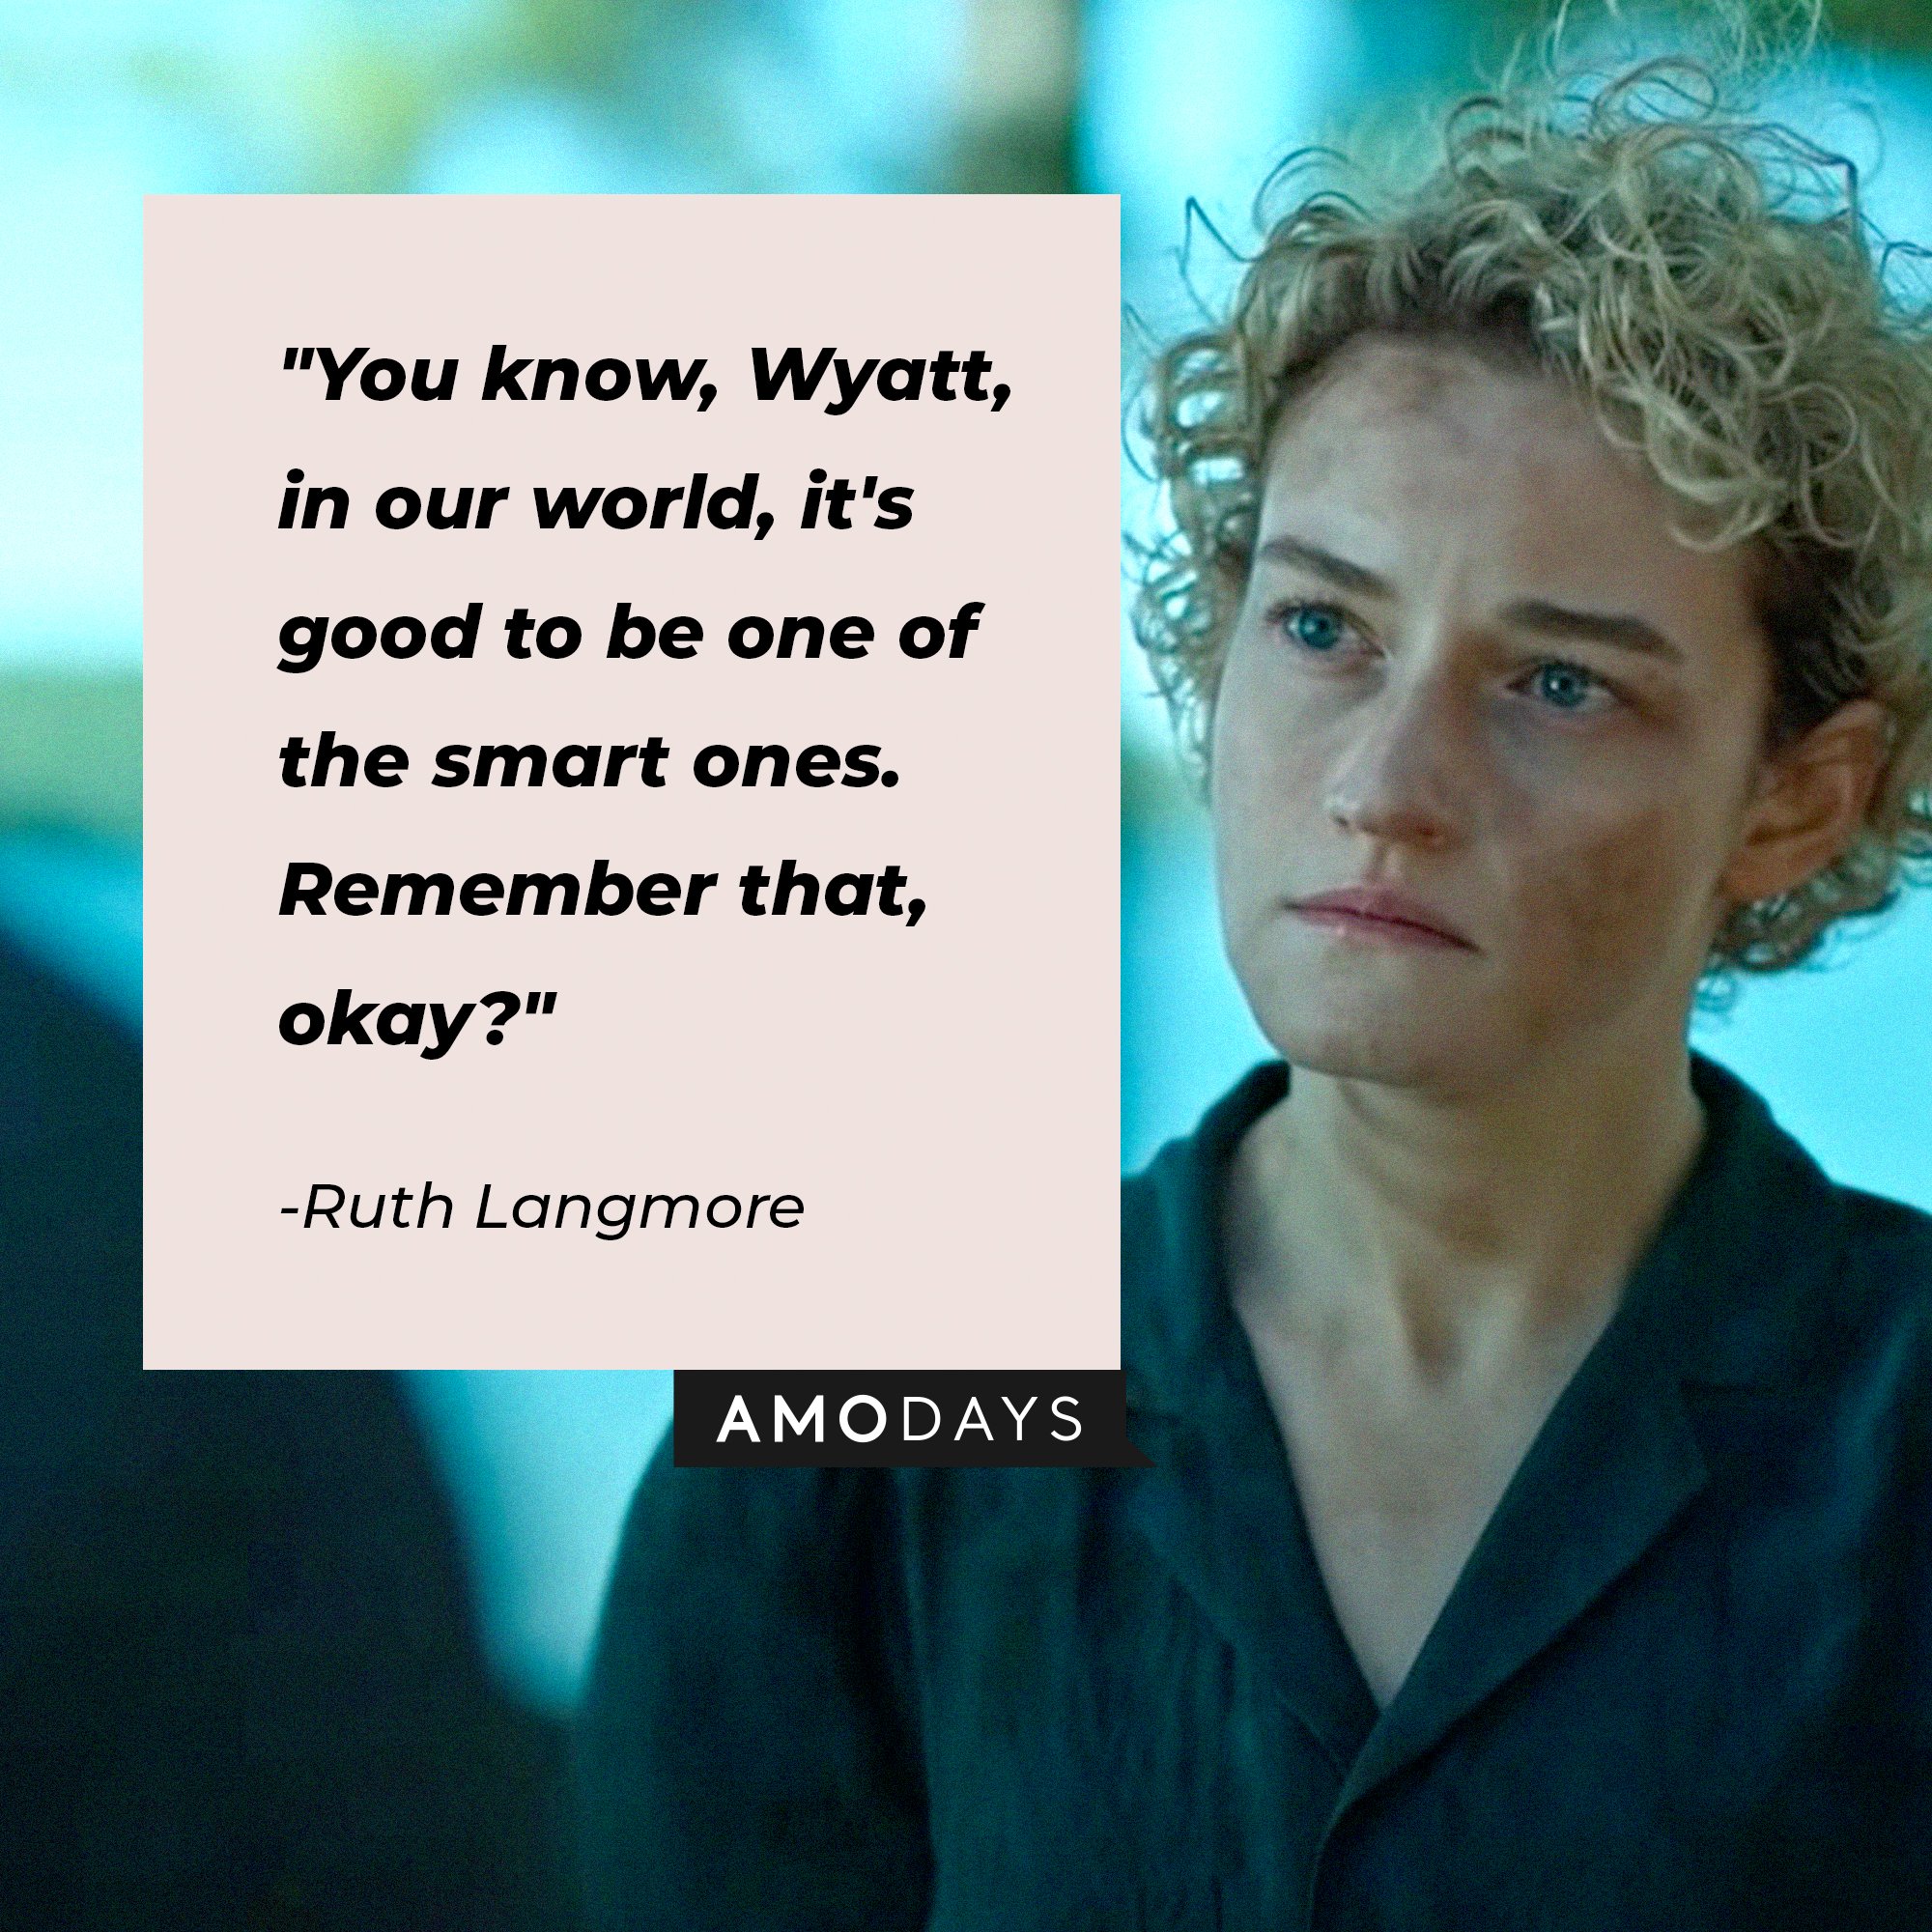 Ruth Langmore’s quote: “You know, Wyatt, In our world, it's good to be one of the smart ones. Remember that, okay?" | Image: AmoDays